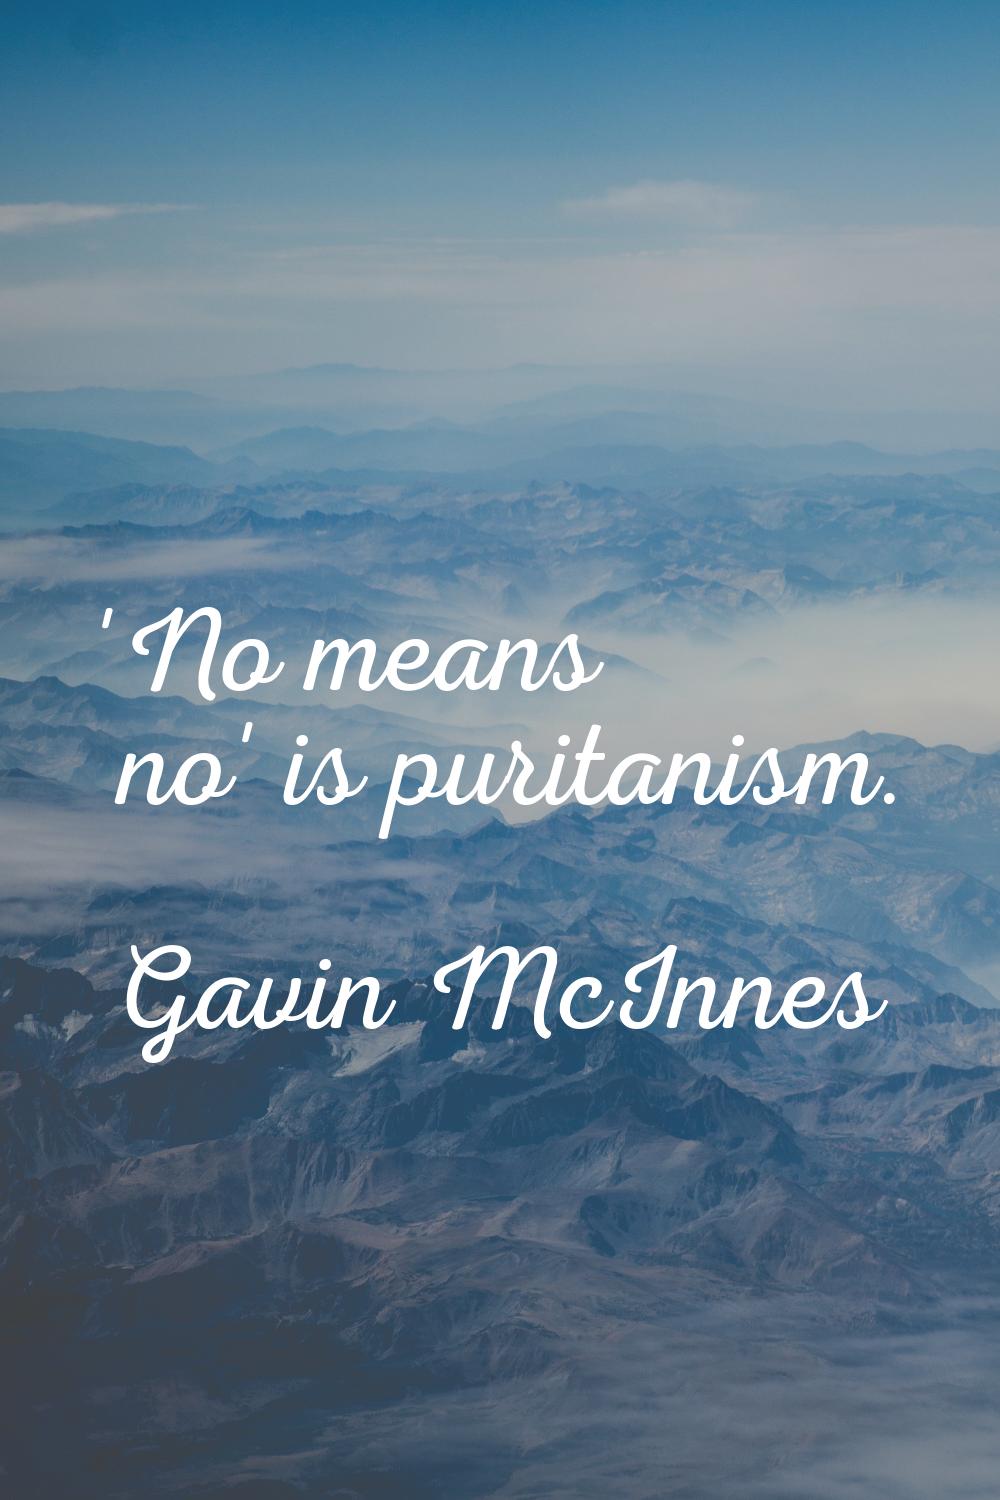 'No means no' is puritanism.